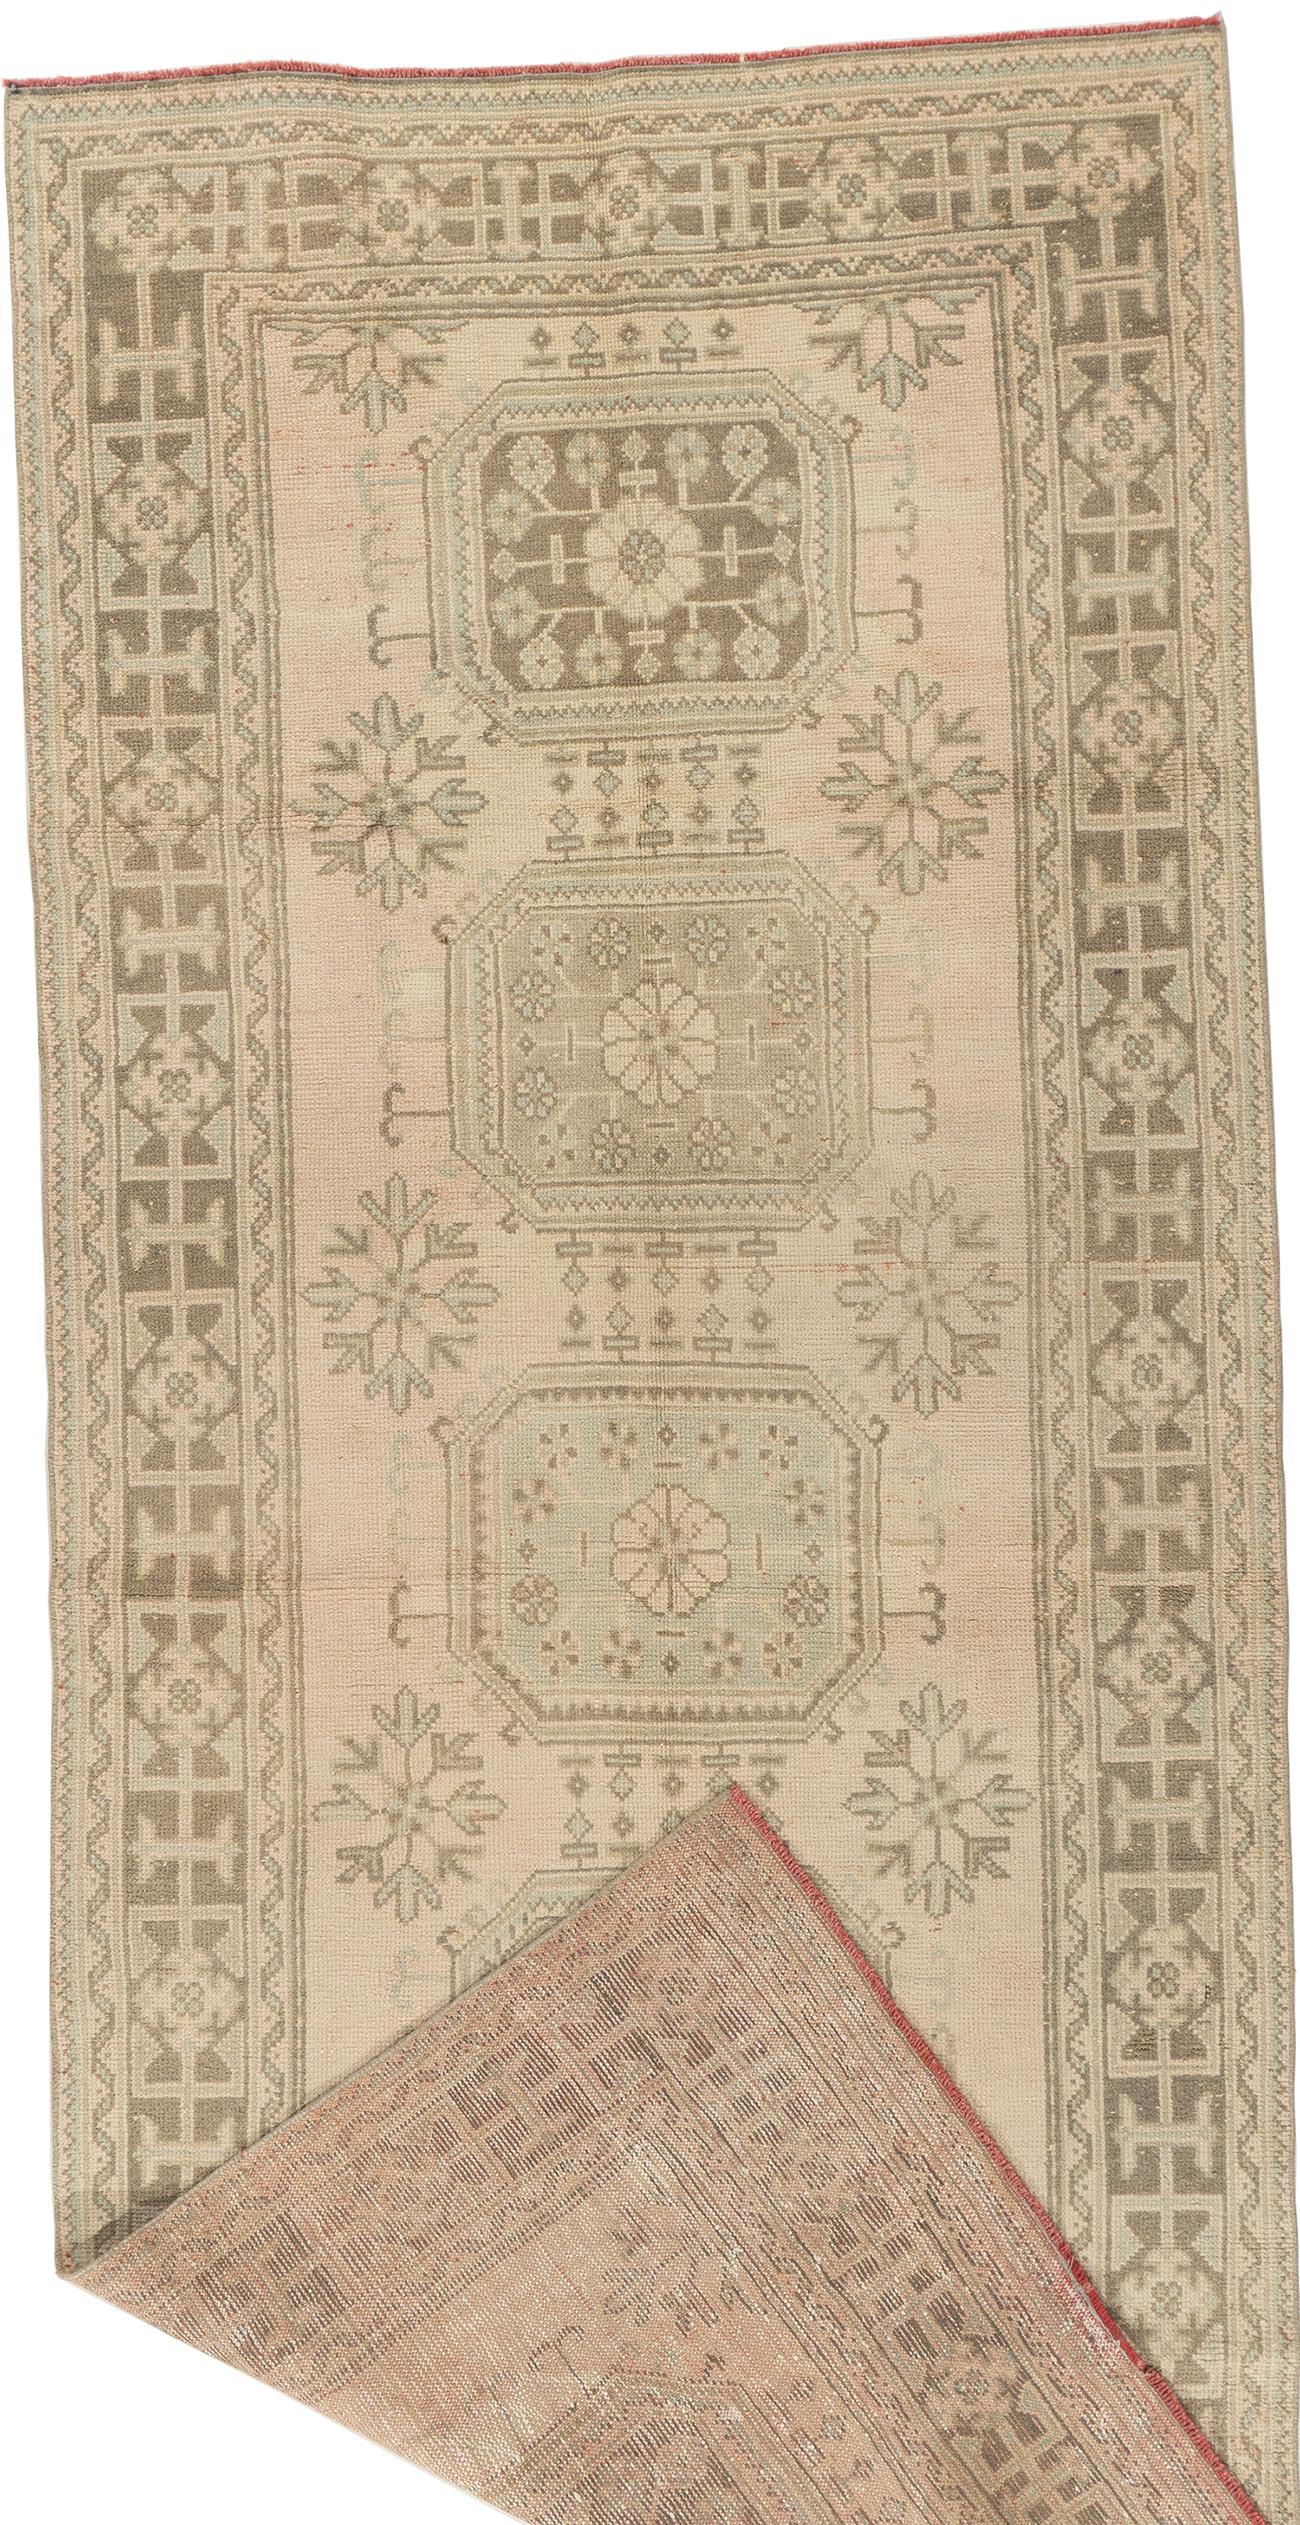 Vintage Oushak Anatolian Runner 4'7 X 11'2. Light colored Oushaks are among the most popular oriental carpets, known for the high quality of their wool their beautiful patterns and warm colors. These designer favorites will complement any interior.